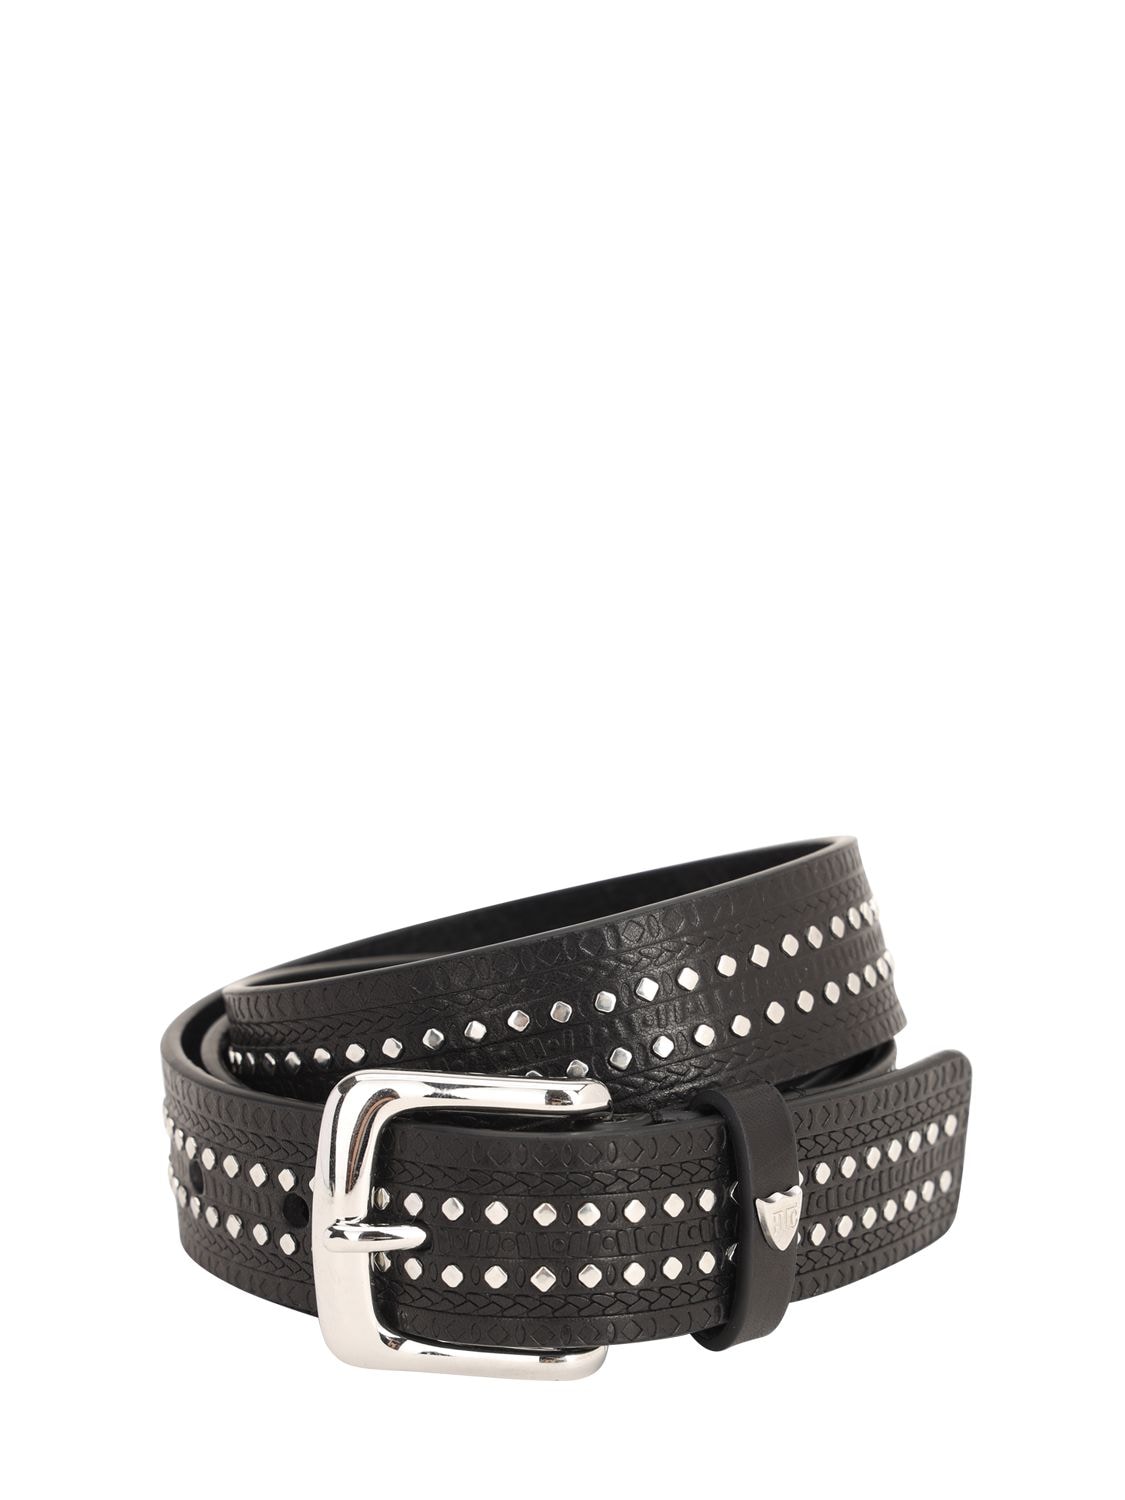 Htc Los Angeles 30mm Studded Leather Belt In Black